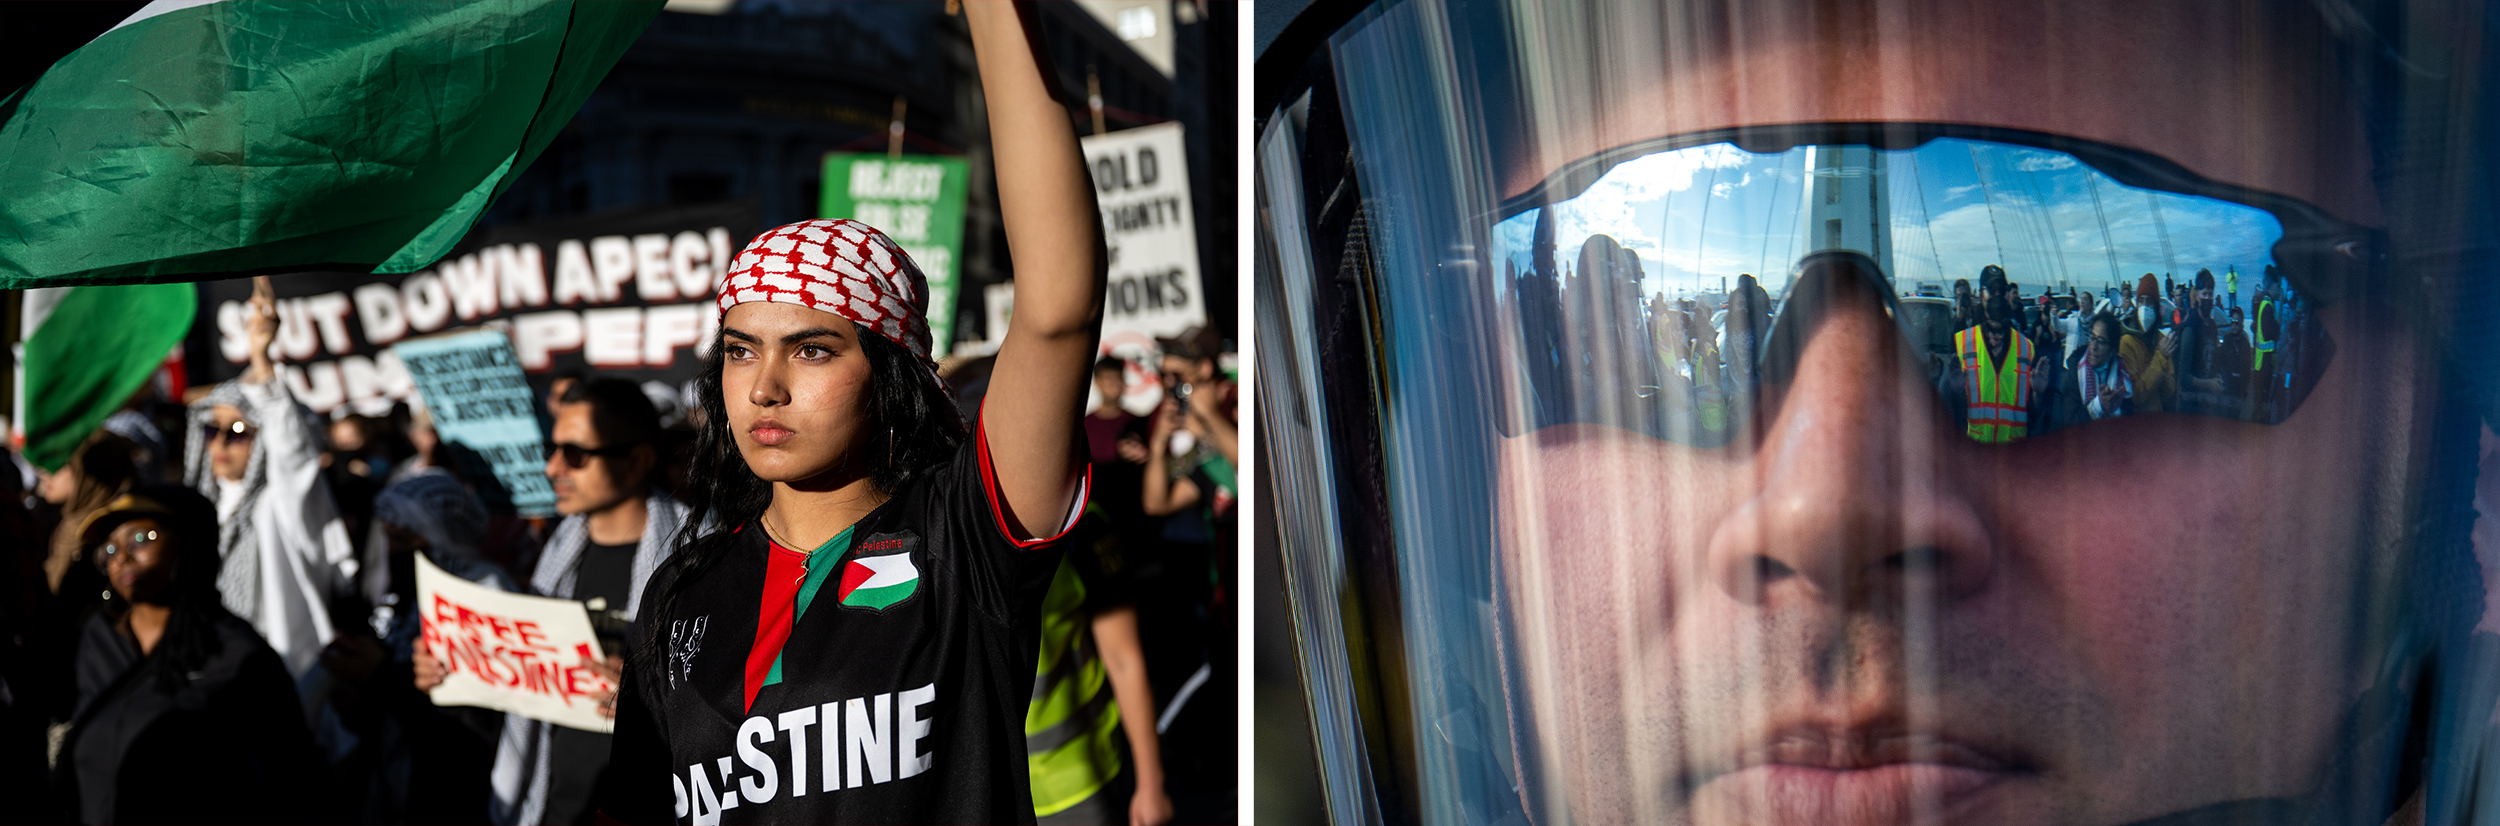 Two photos: On the left, a large group of people waving flags and holding signs. On the right, the reflection of a large group of people in the sunglasses of a person wearing a clear full face mask.